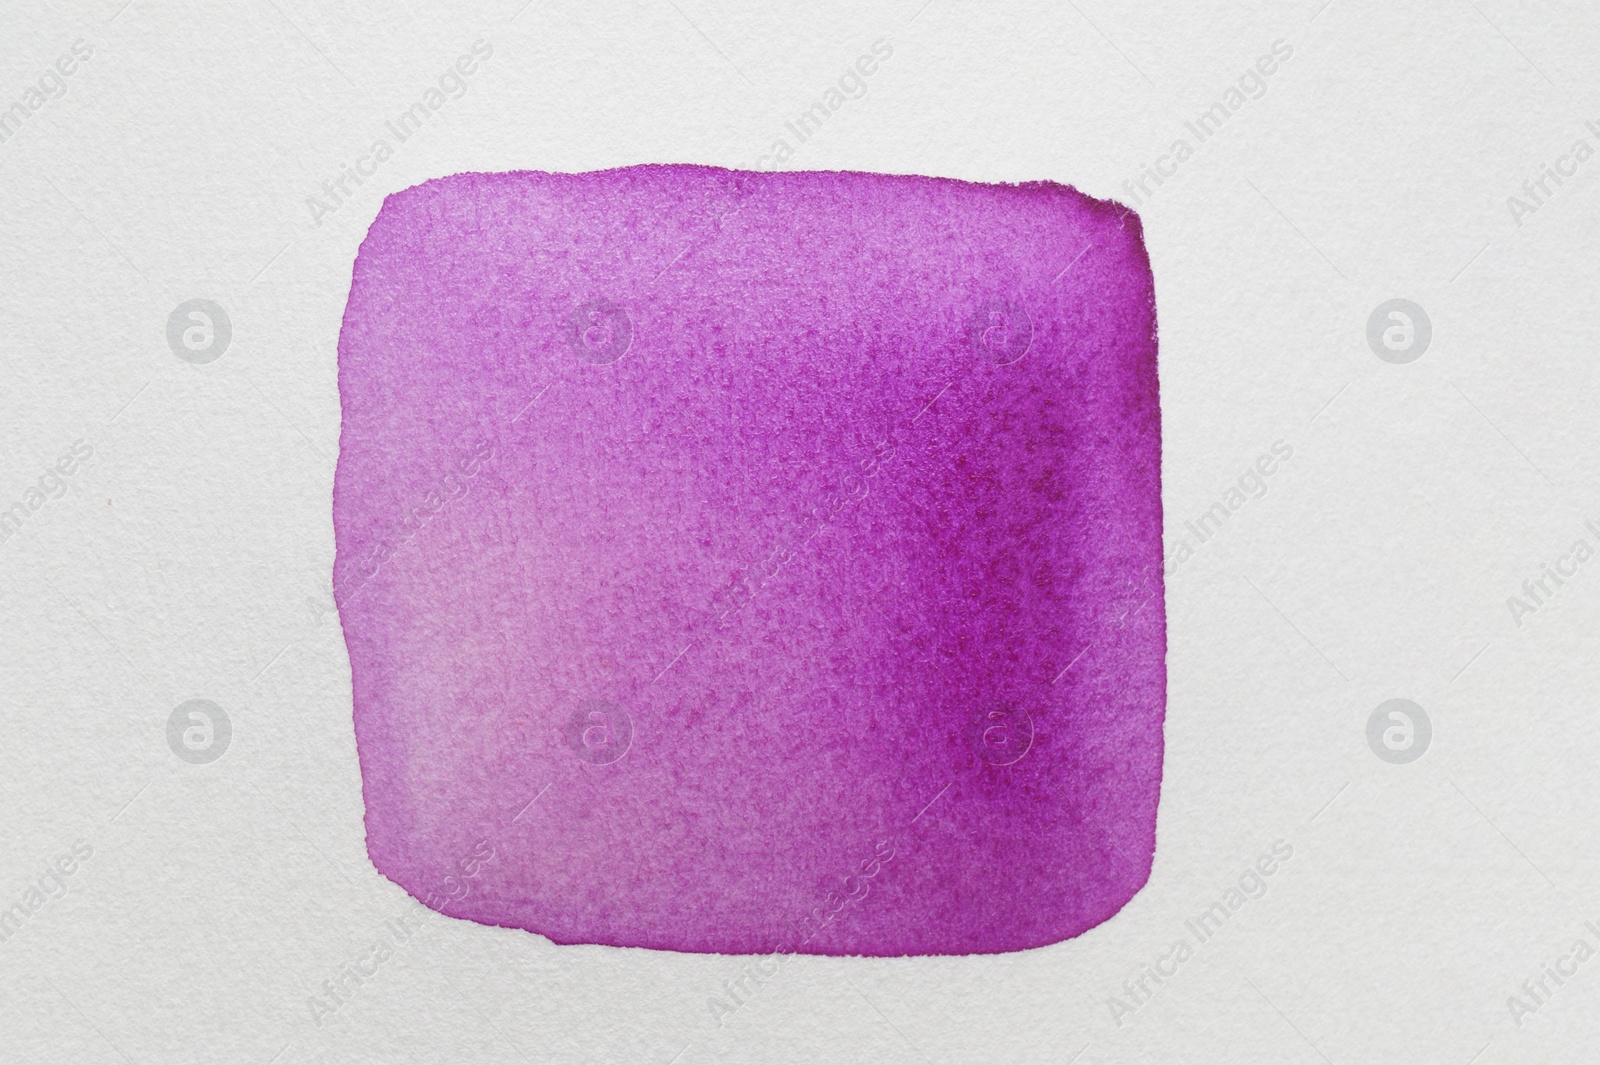 Photo of Square drawn with purple watercolor paint on white background, top view